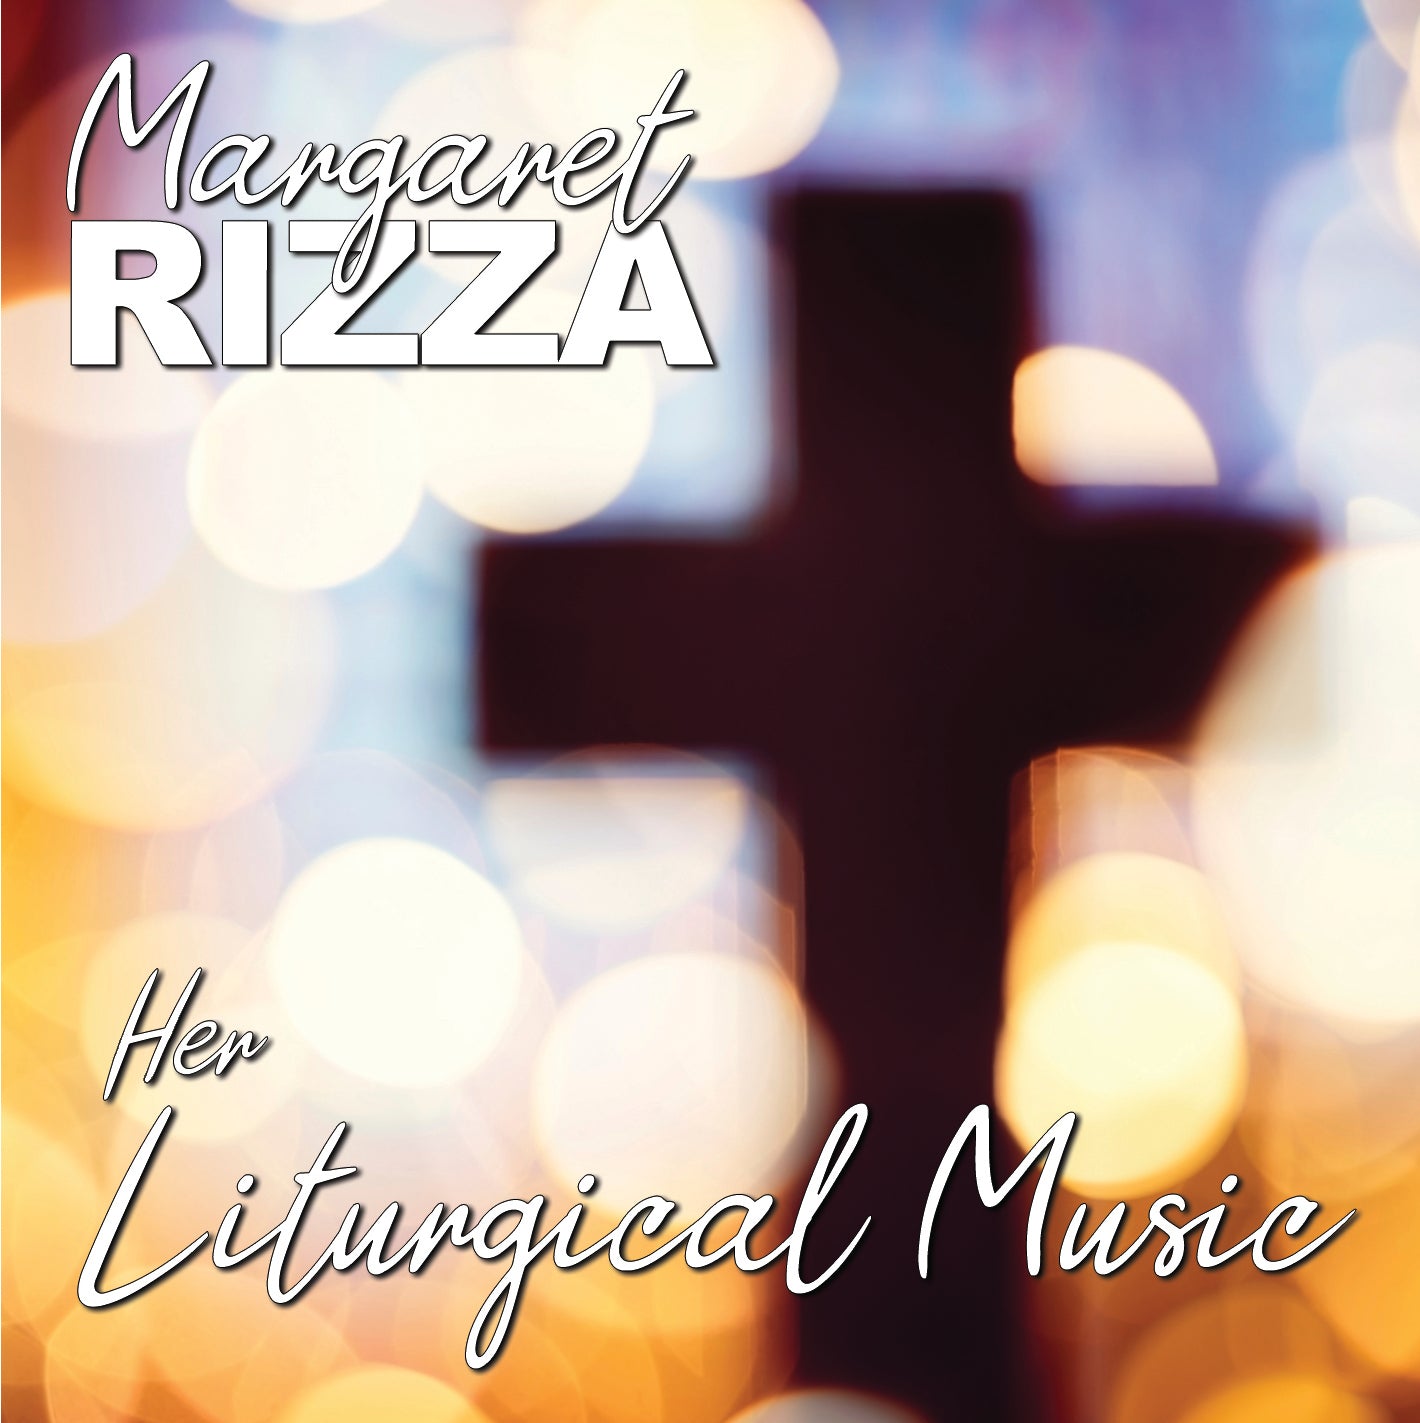 Her Liturgical Music - Margaret Rizza